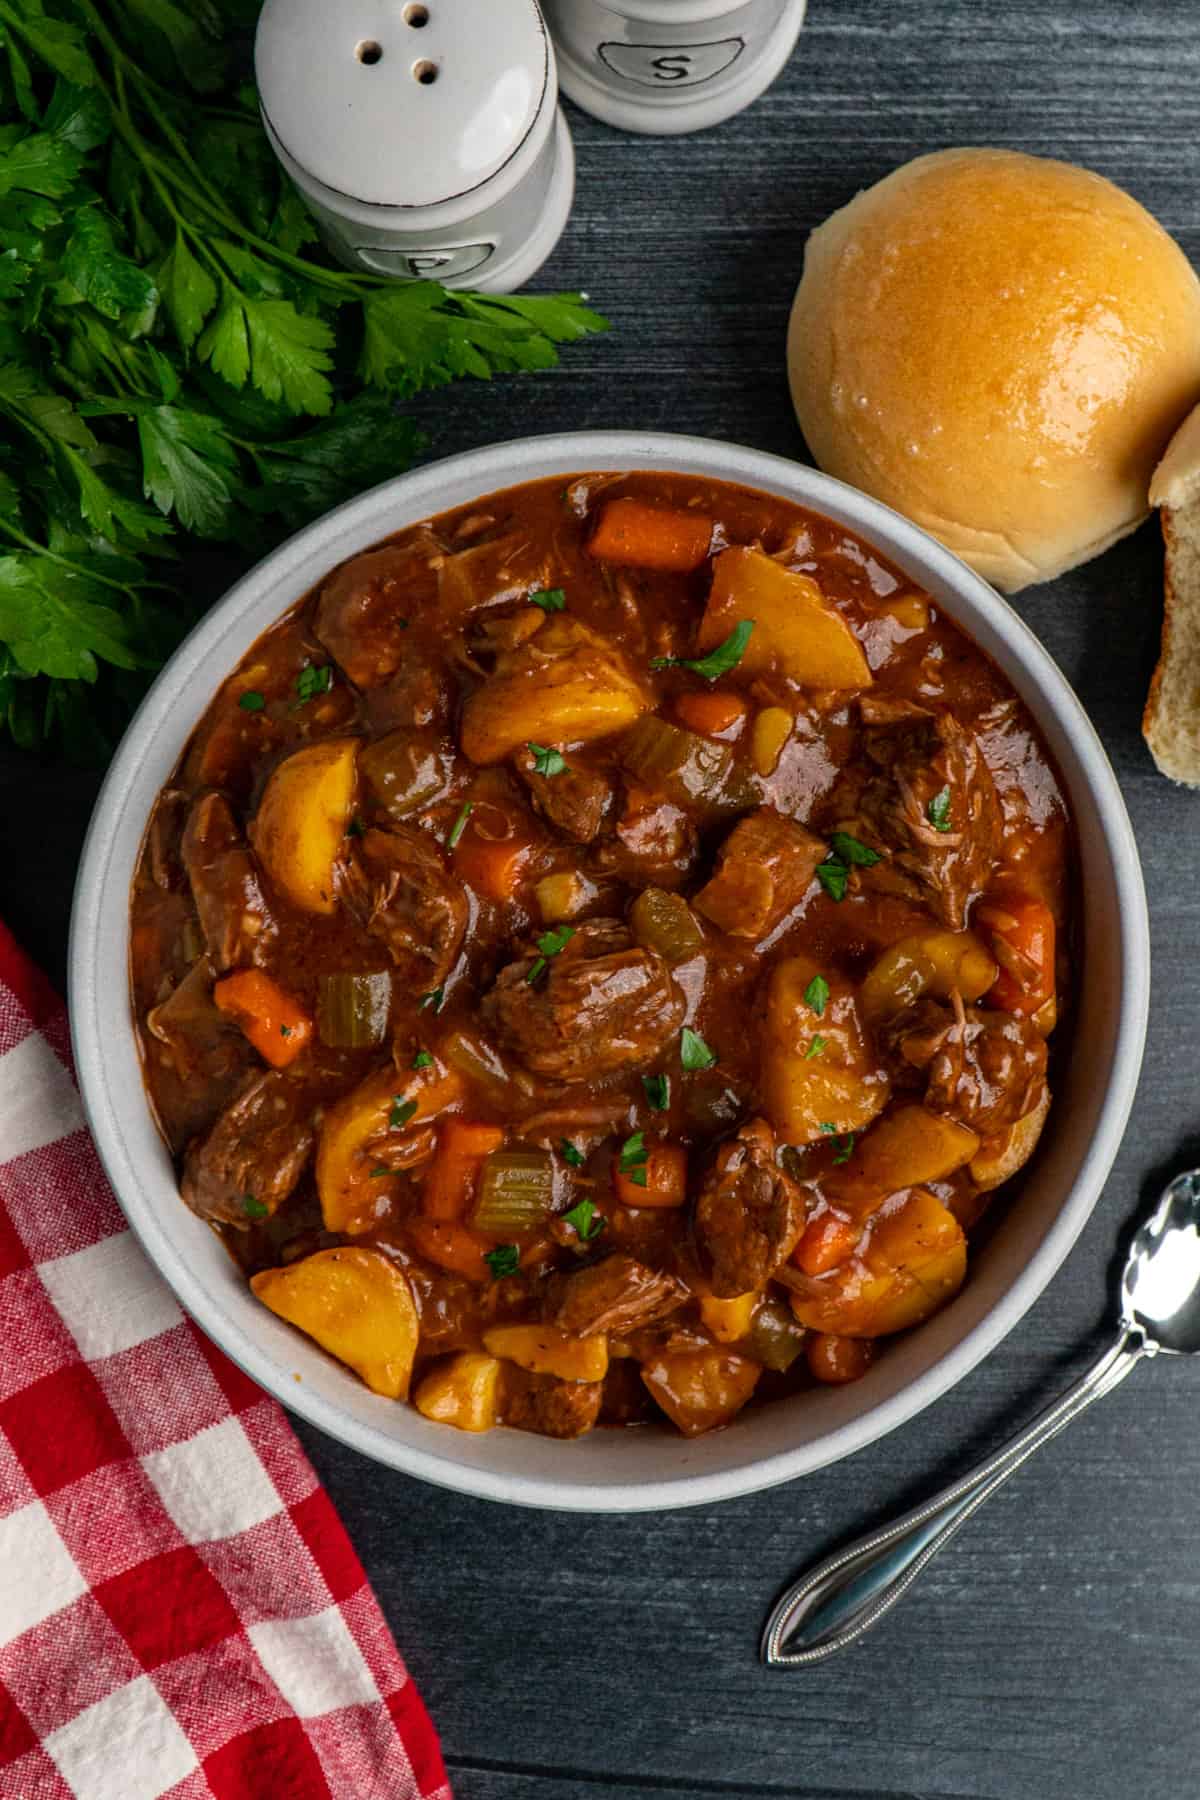 Overhead look at slow cooker beef stew in a white bowl with parsley and a roll in the background